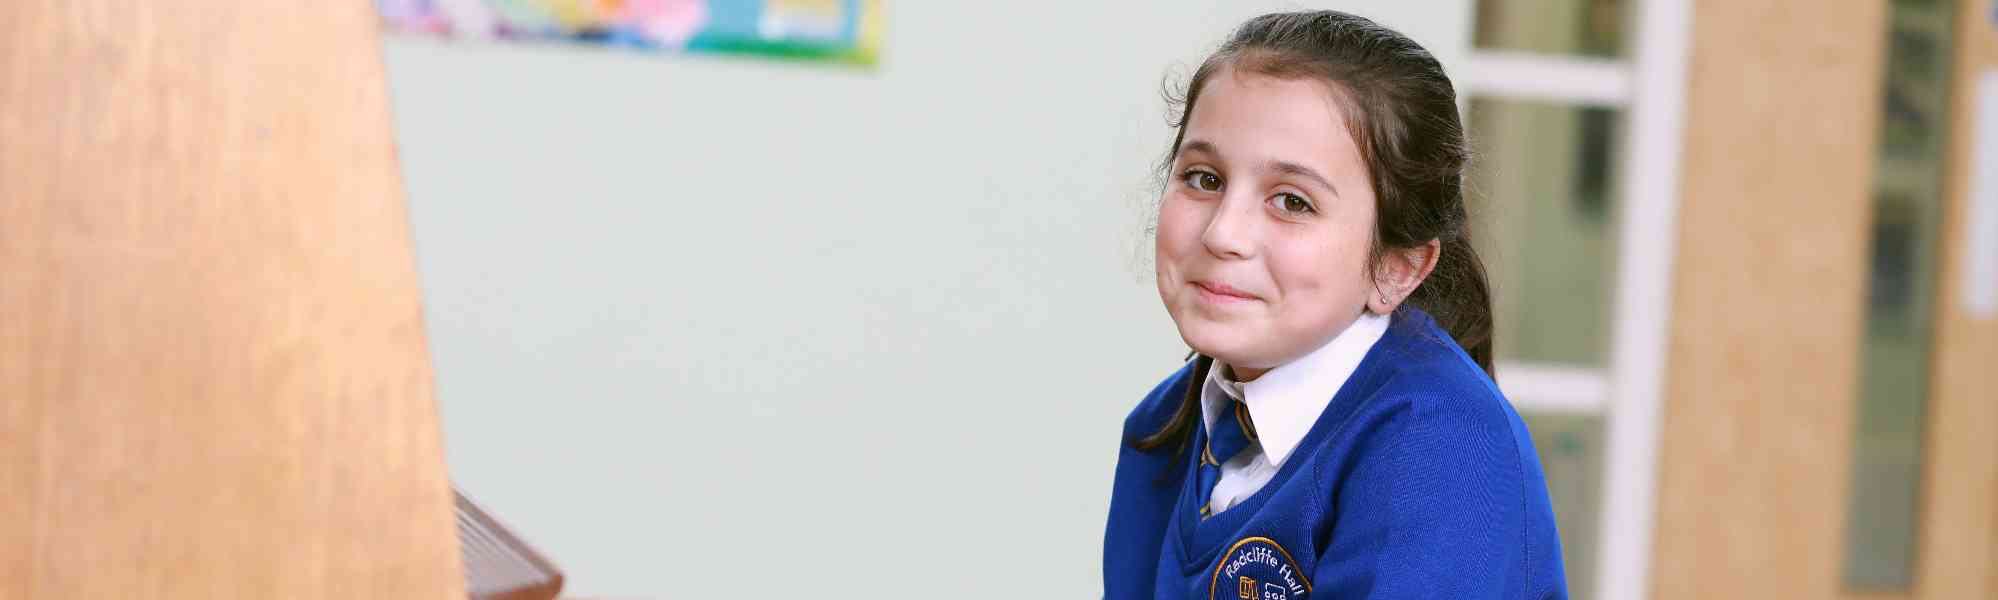 Pupil at Radcliffe Hall Primary School